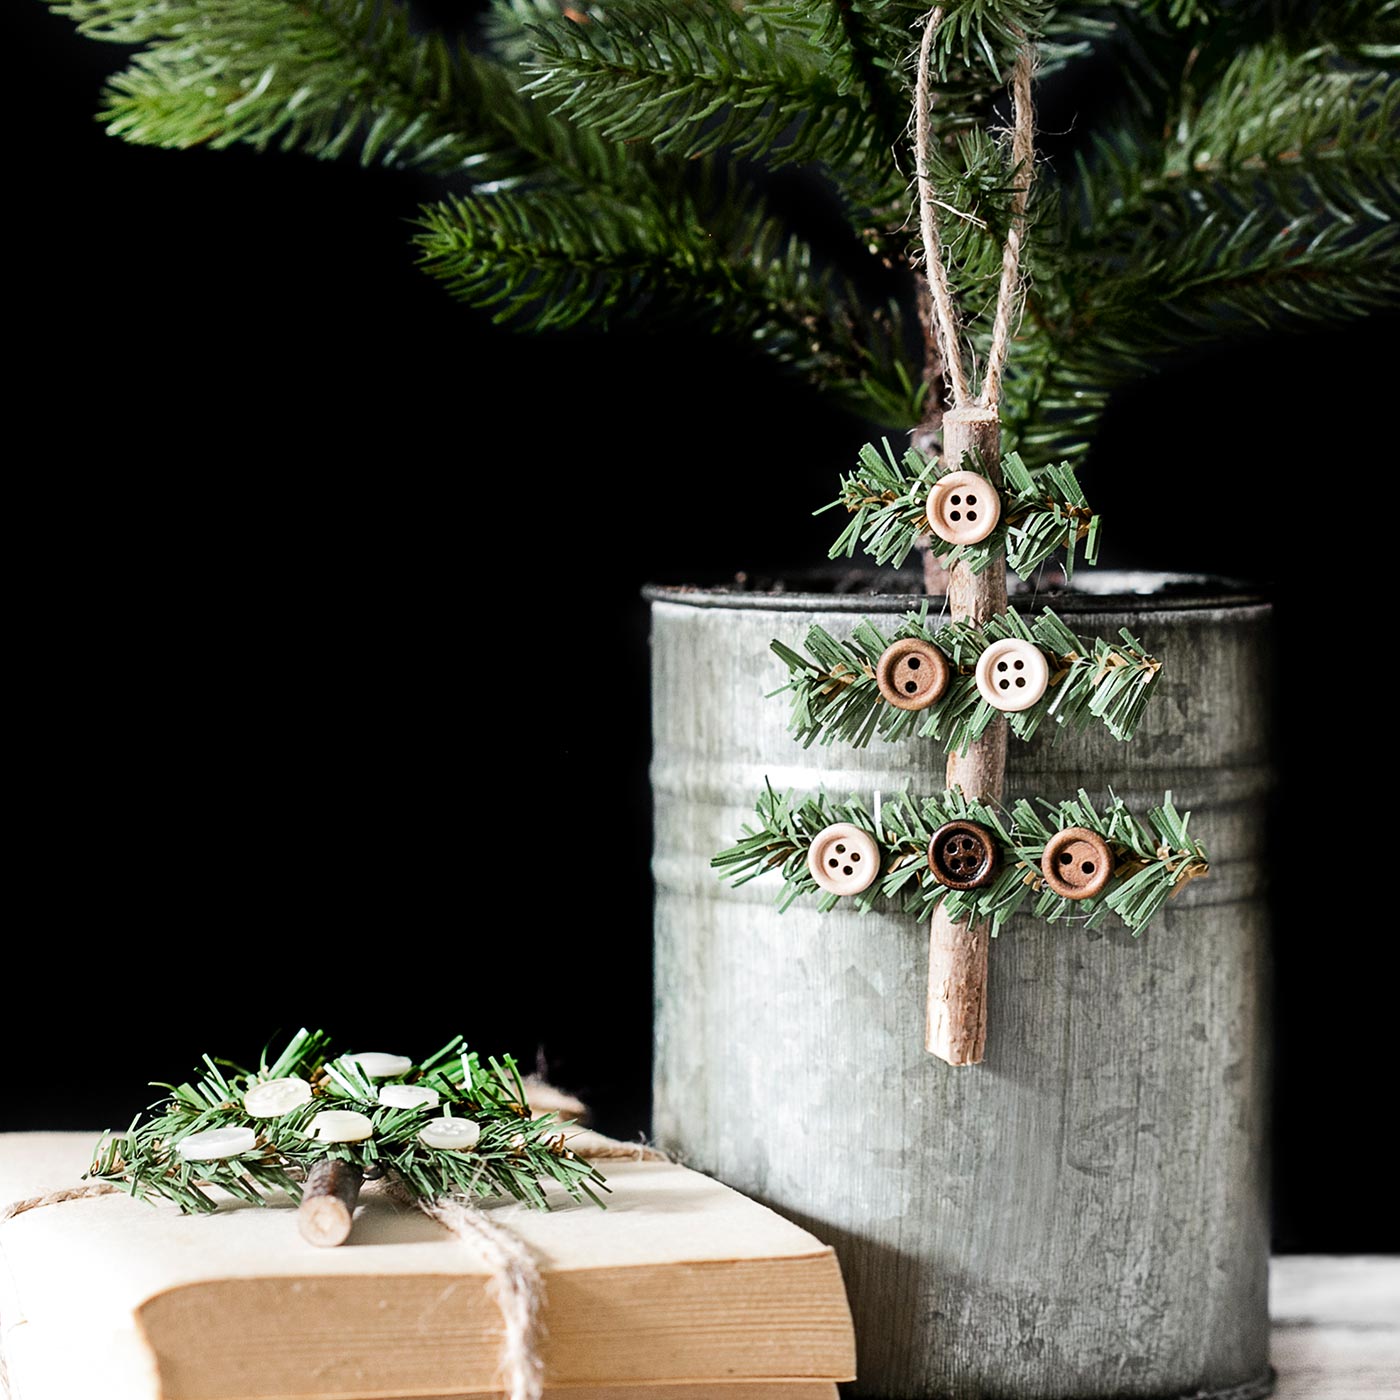 DIY Rustic Christmas Wrapping - Live Laugh Rowe